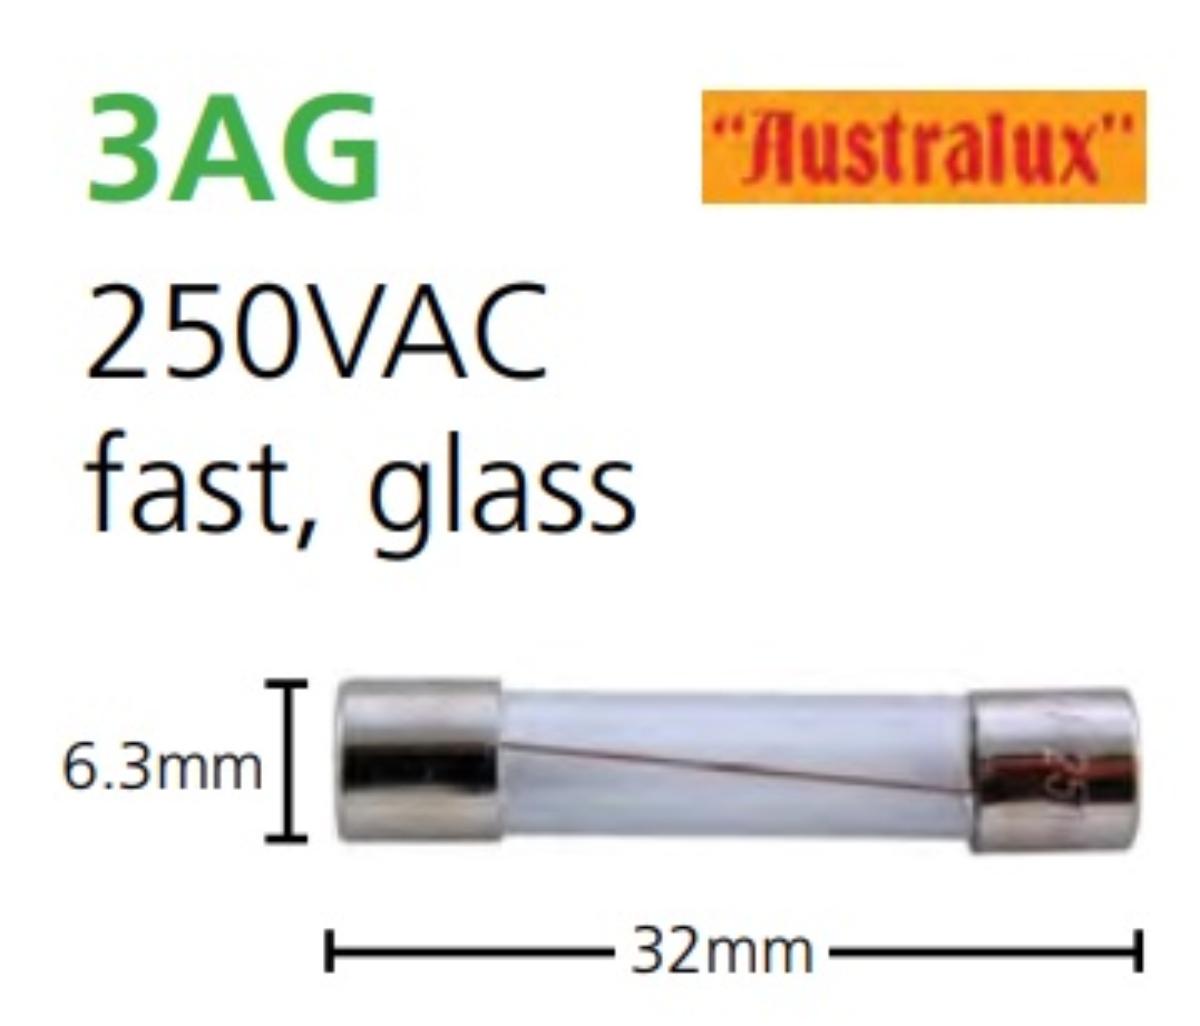 3AG GLASS FUSE FAST 250V 4A 32X6.3MM